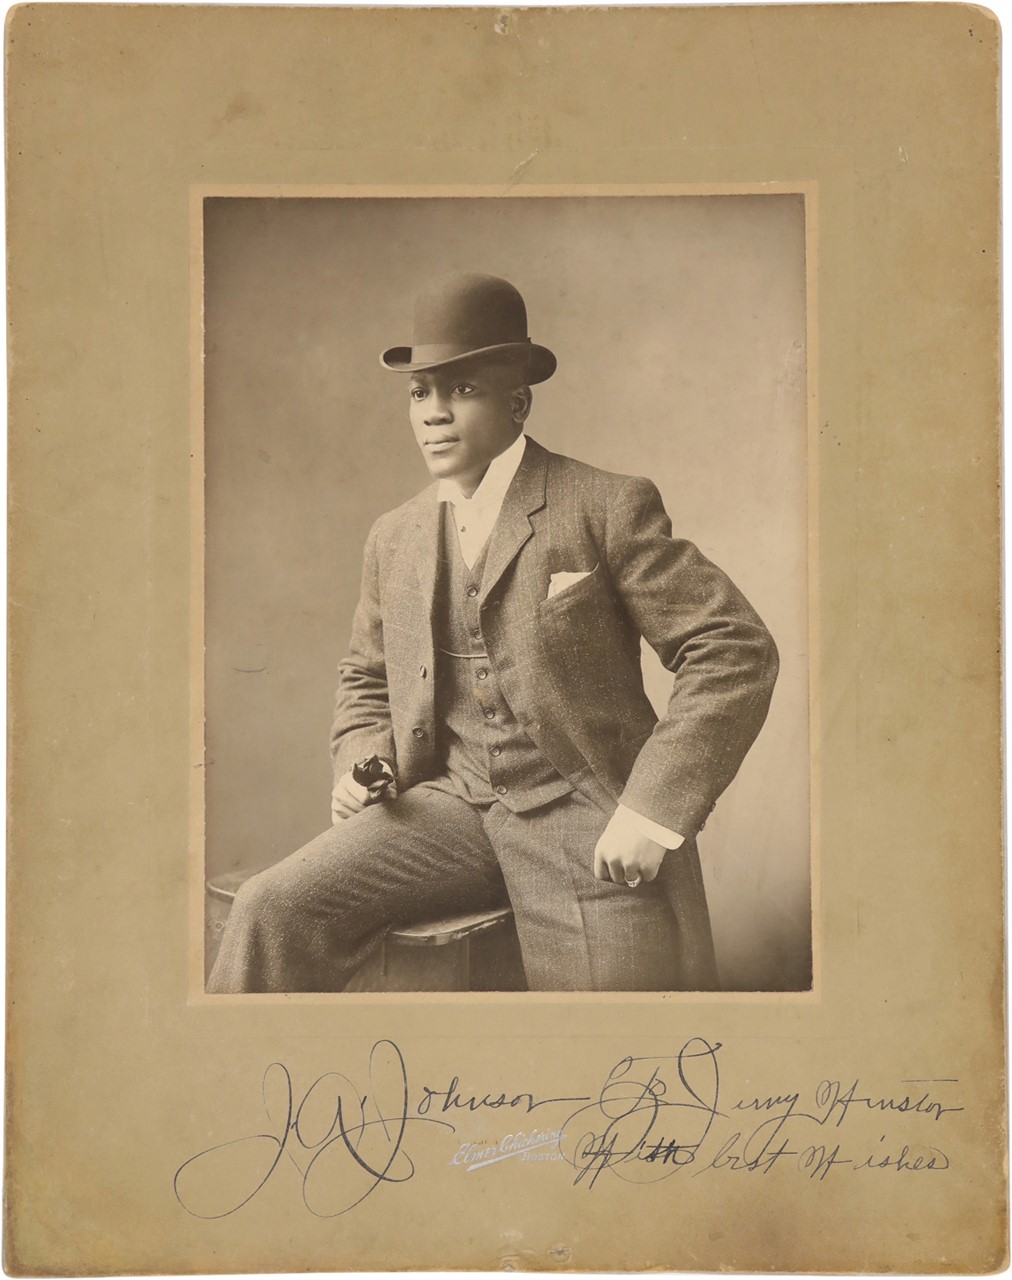 Muhammad Ali & Boxing - Fantastic Jack Johnson Signed Imperial Cabinet Card by Chickering (PSA)